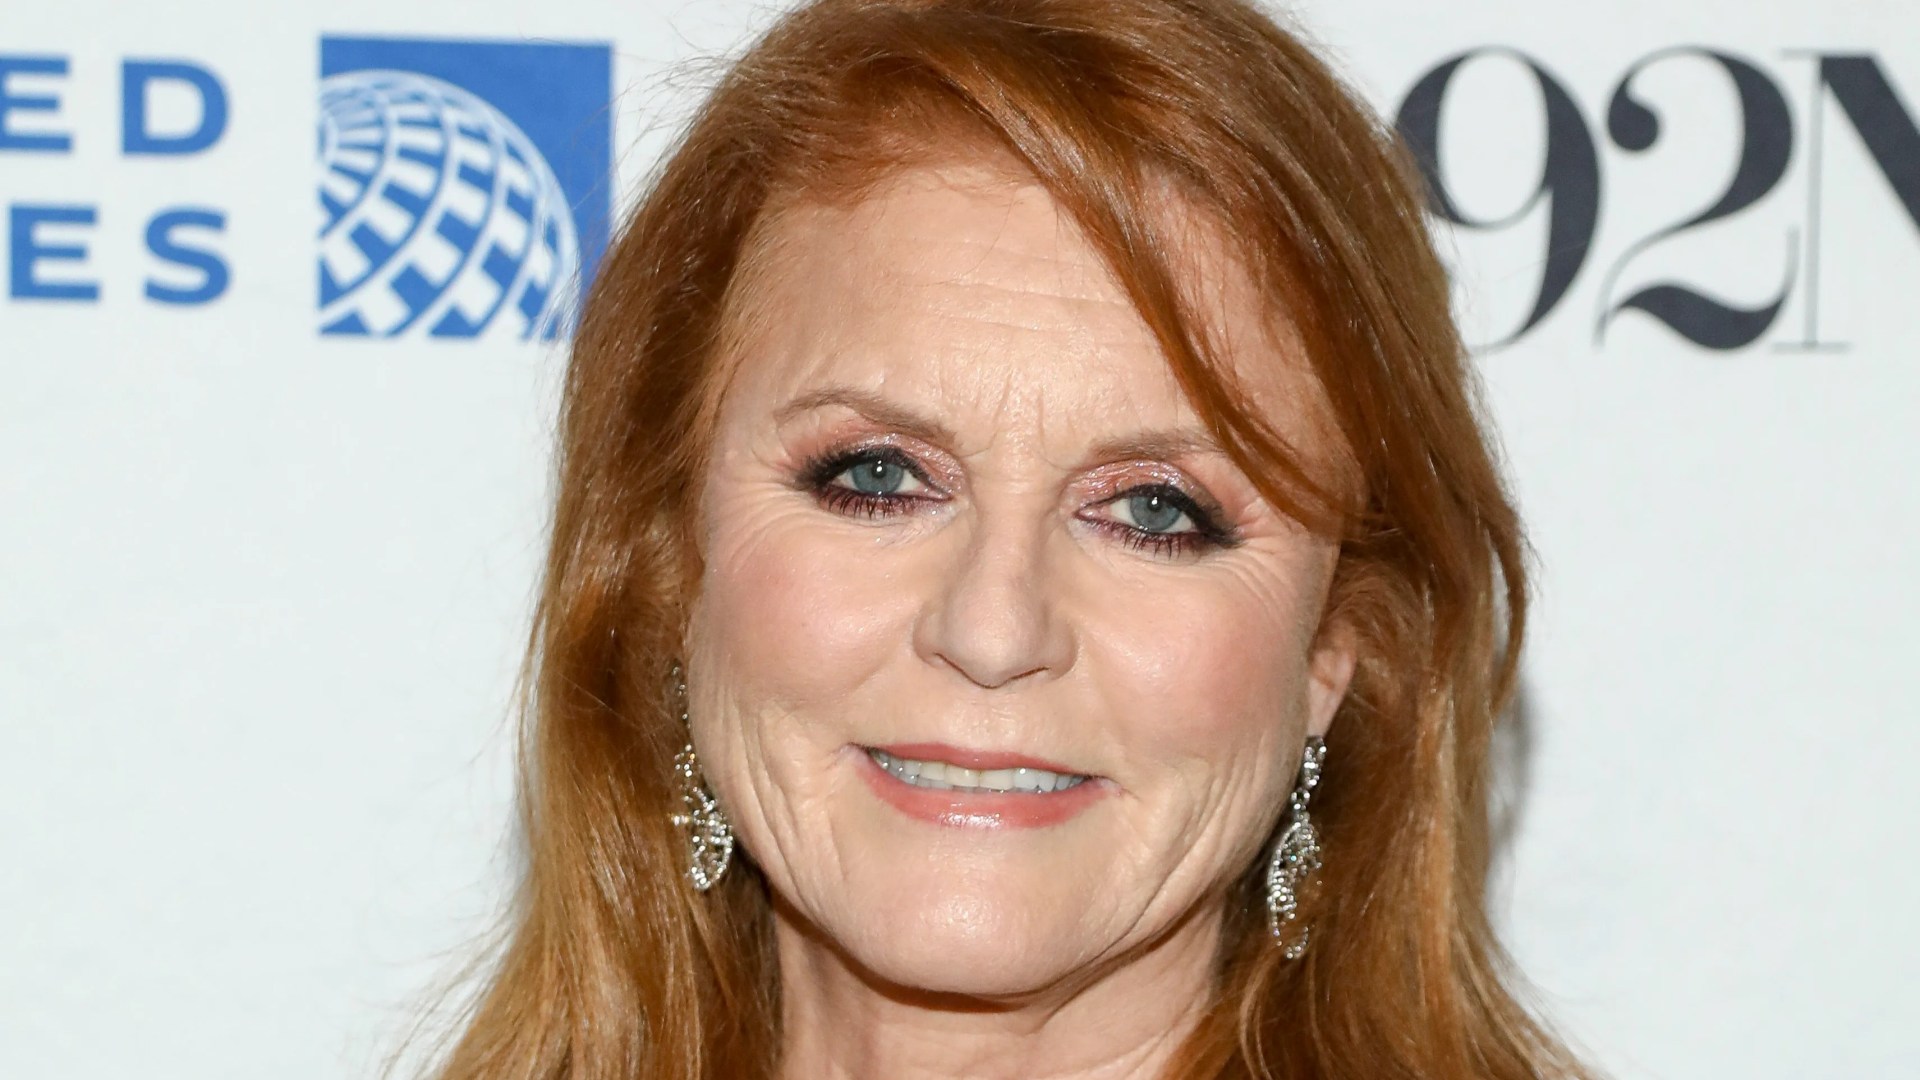 Sarah Ferguson says her skin cancer has stopped spreading following surgery [Video]